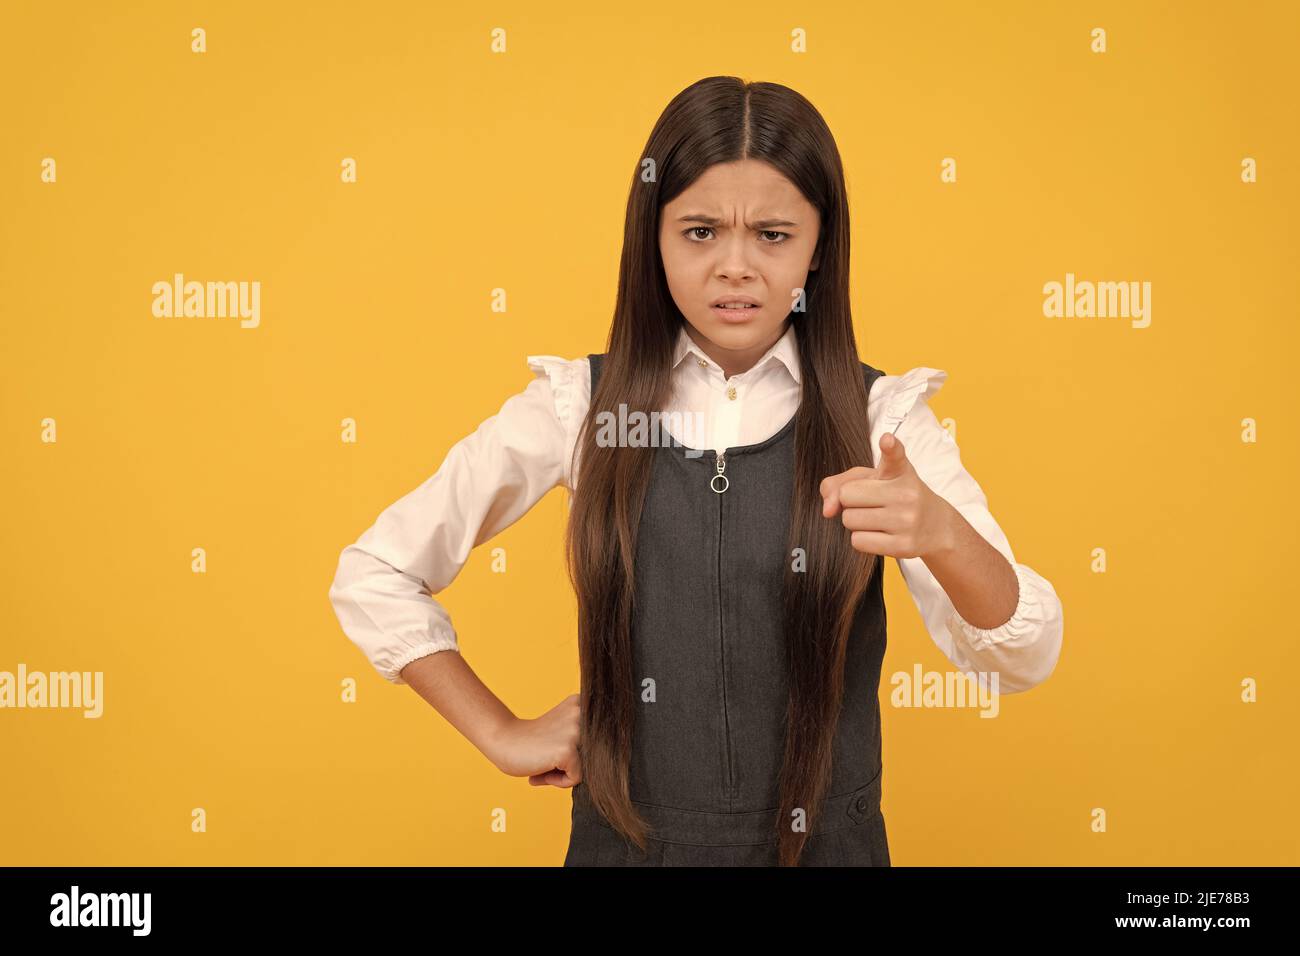 Angry kid in school uniform point accusing finger yellow background, accuse Stock Photo